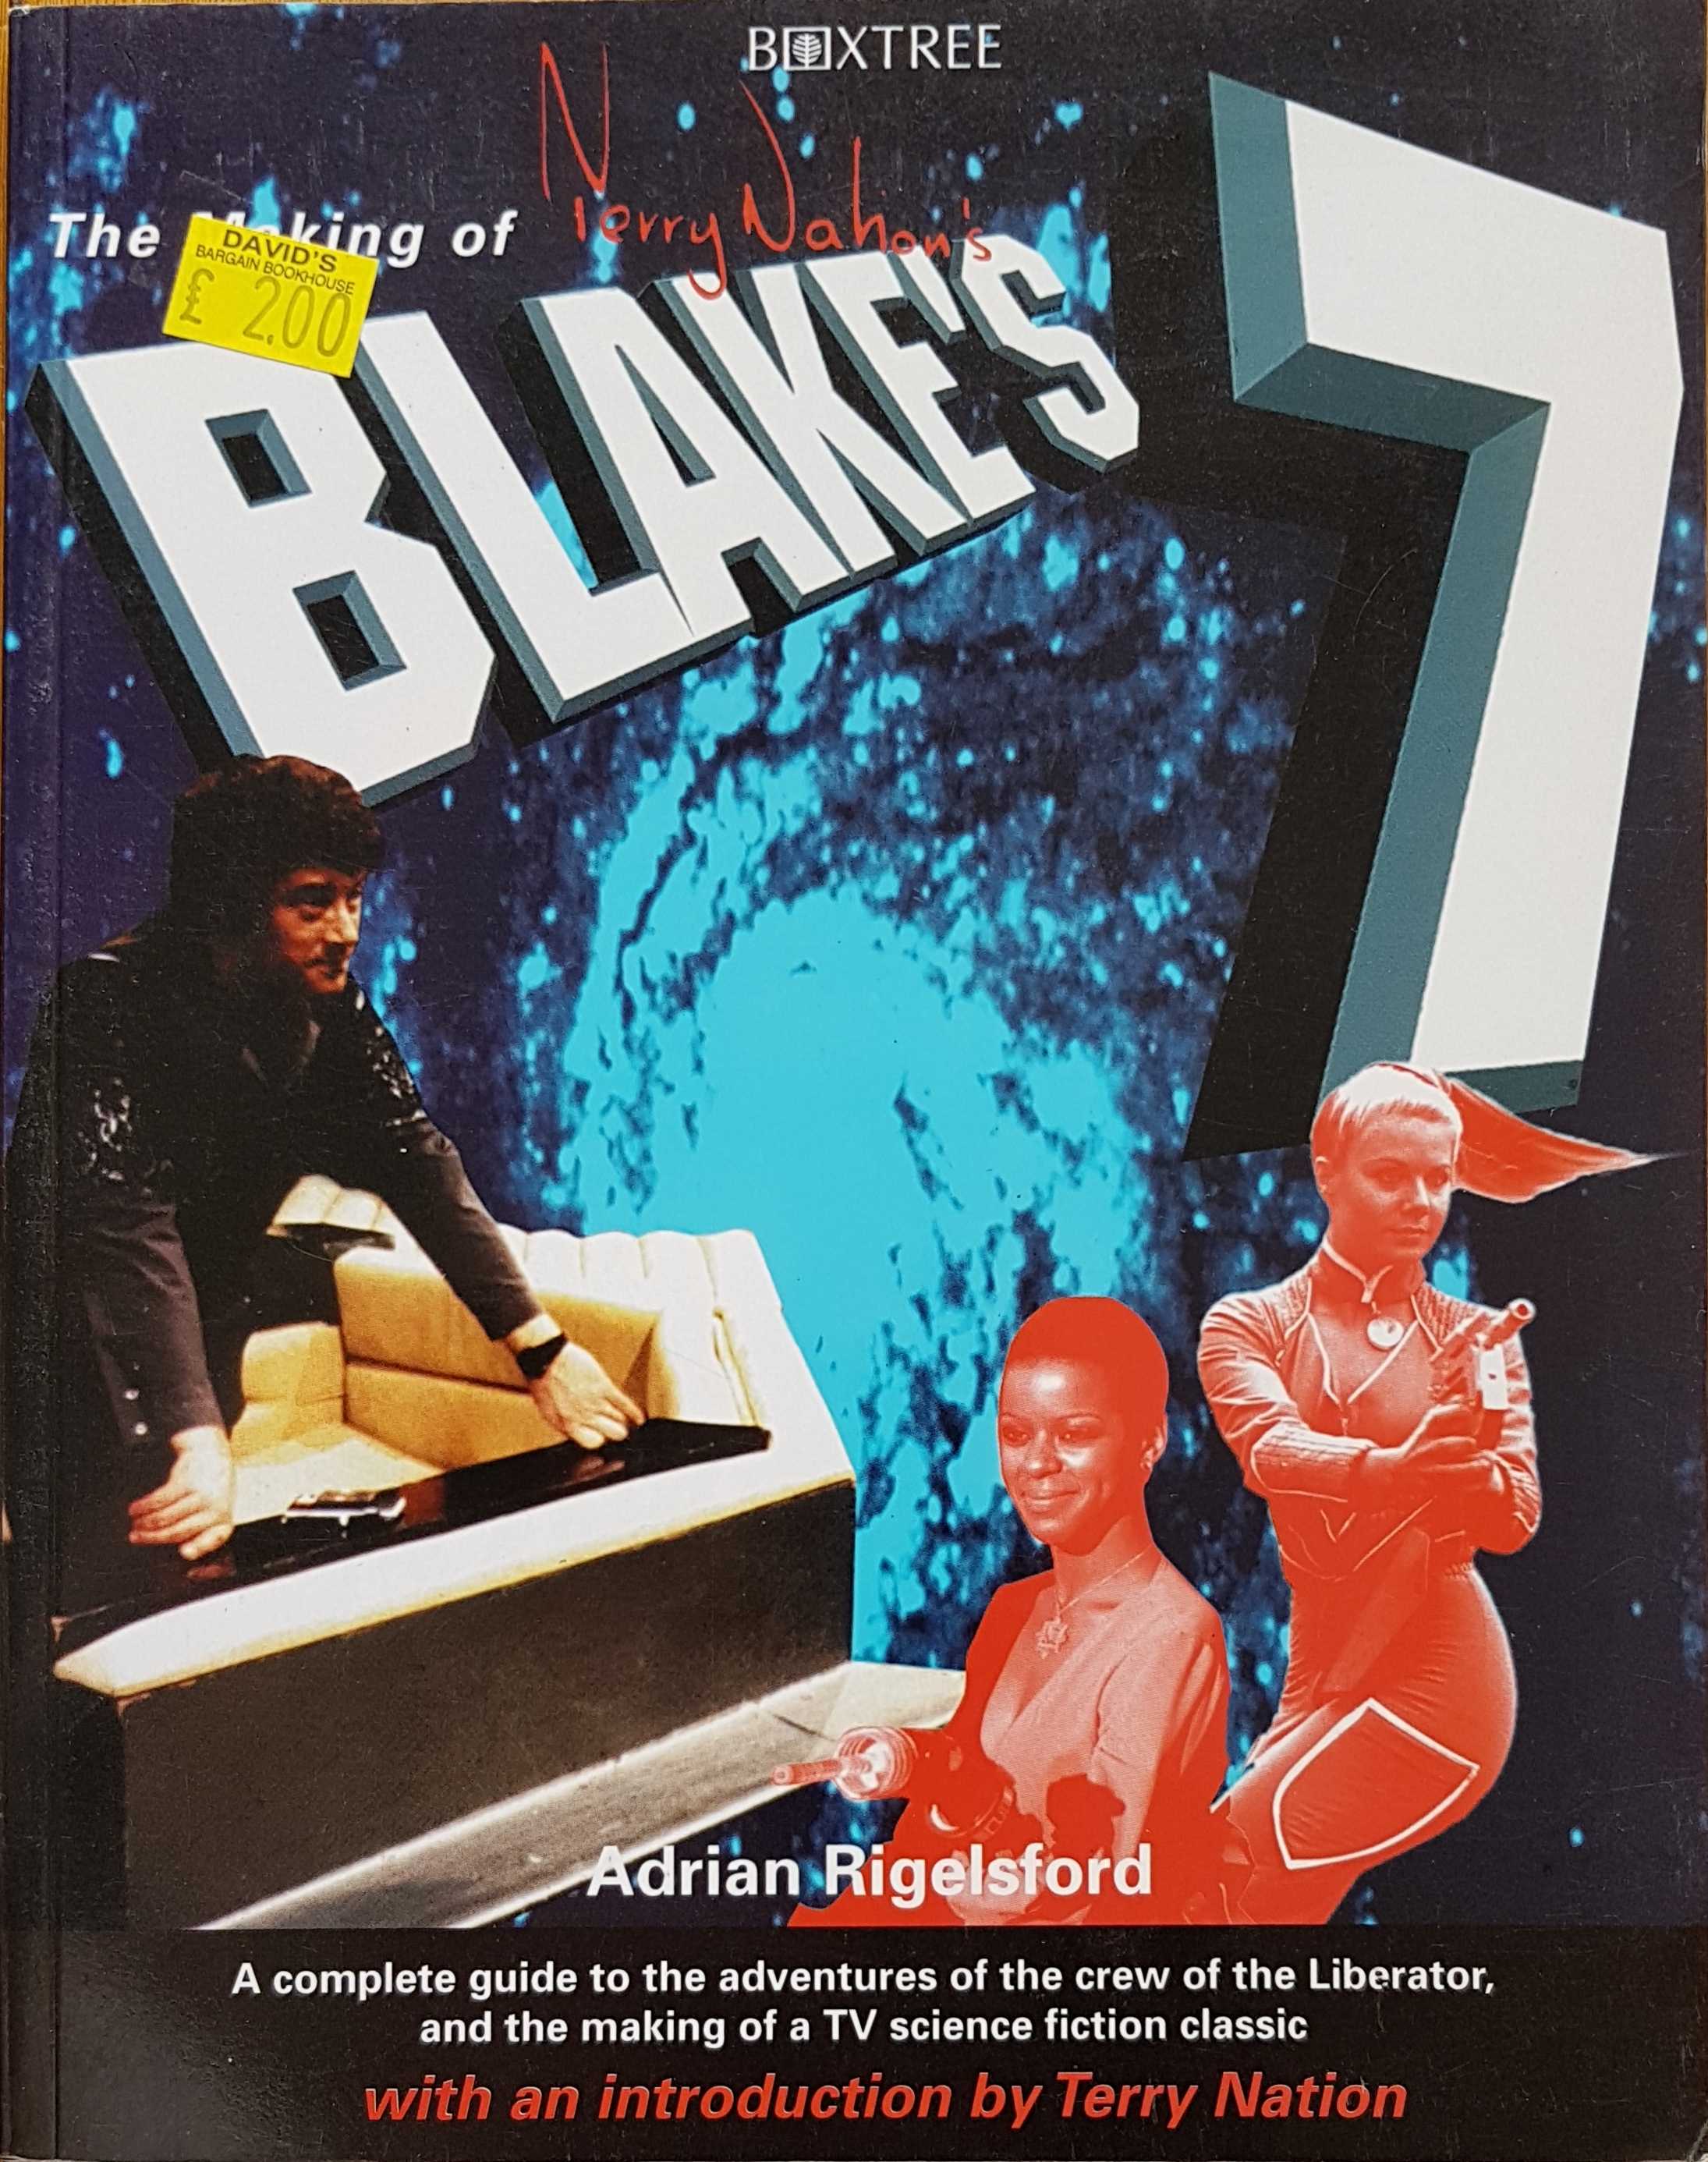 Picture of Blake's 7 - The making of by artist Adrian Rigeksford from the BBC books - Records and Tapes library